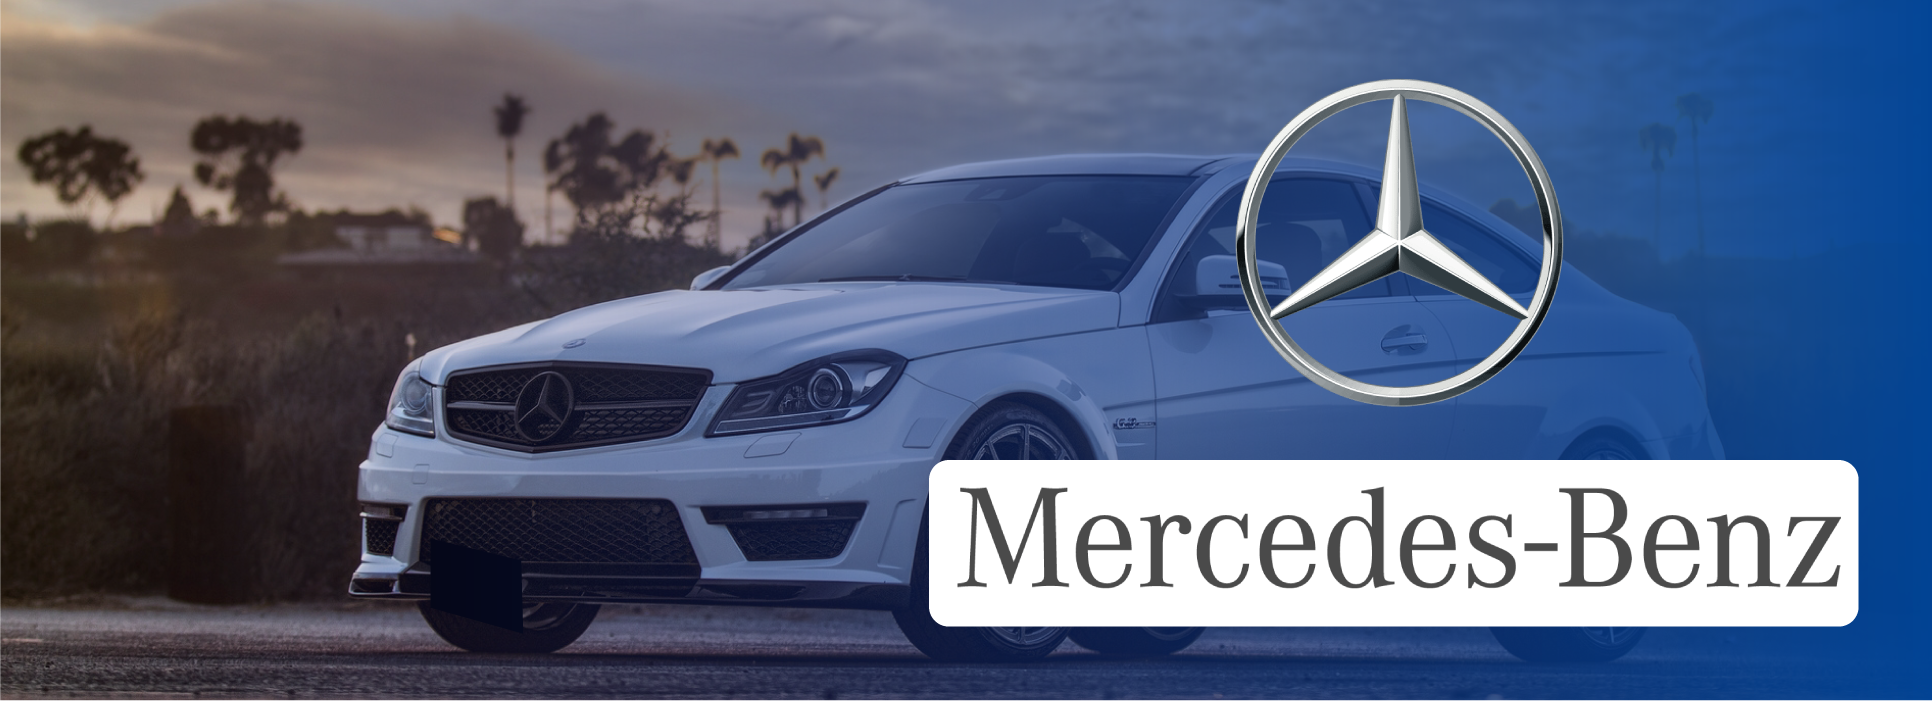 Sell My Mercedes-Benz